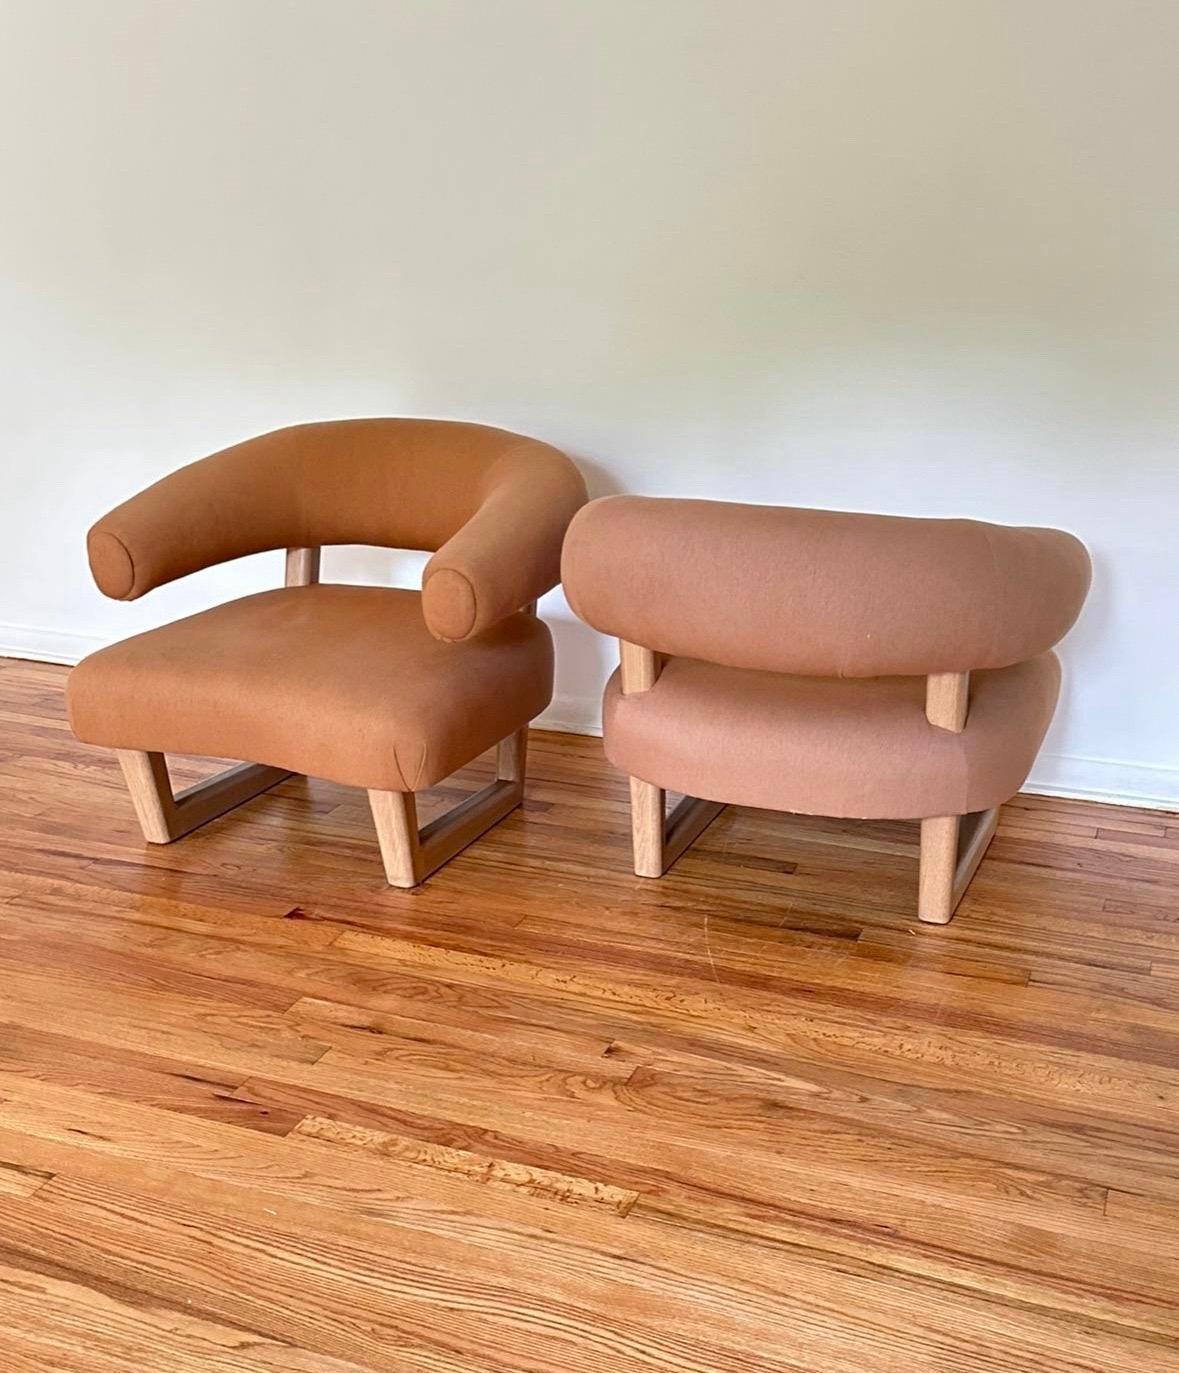 Italian Pair of Armchairs by Peter Marino for the Getty Nyc French modernist organic  For Sale